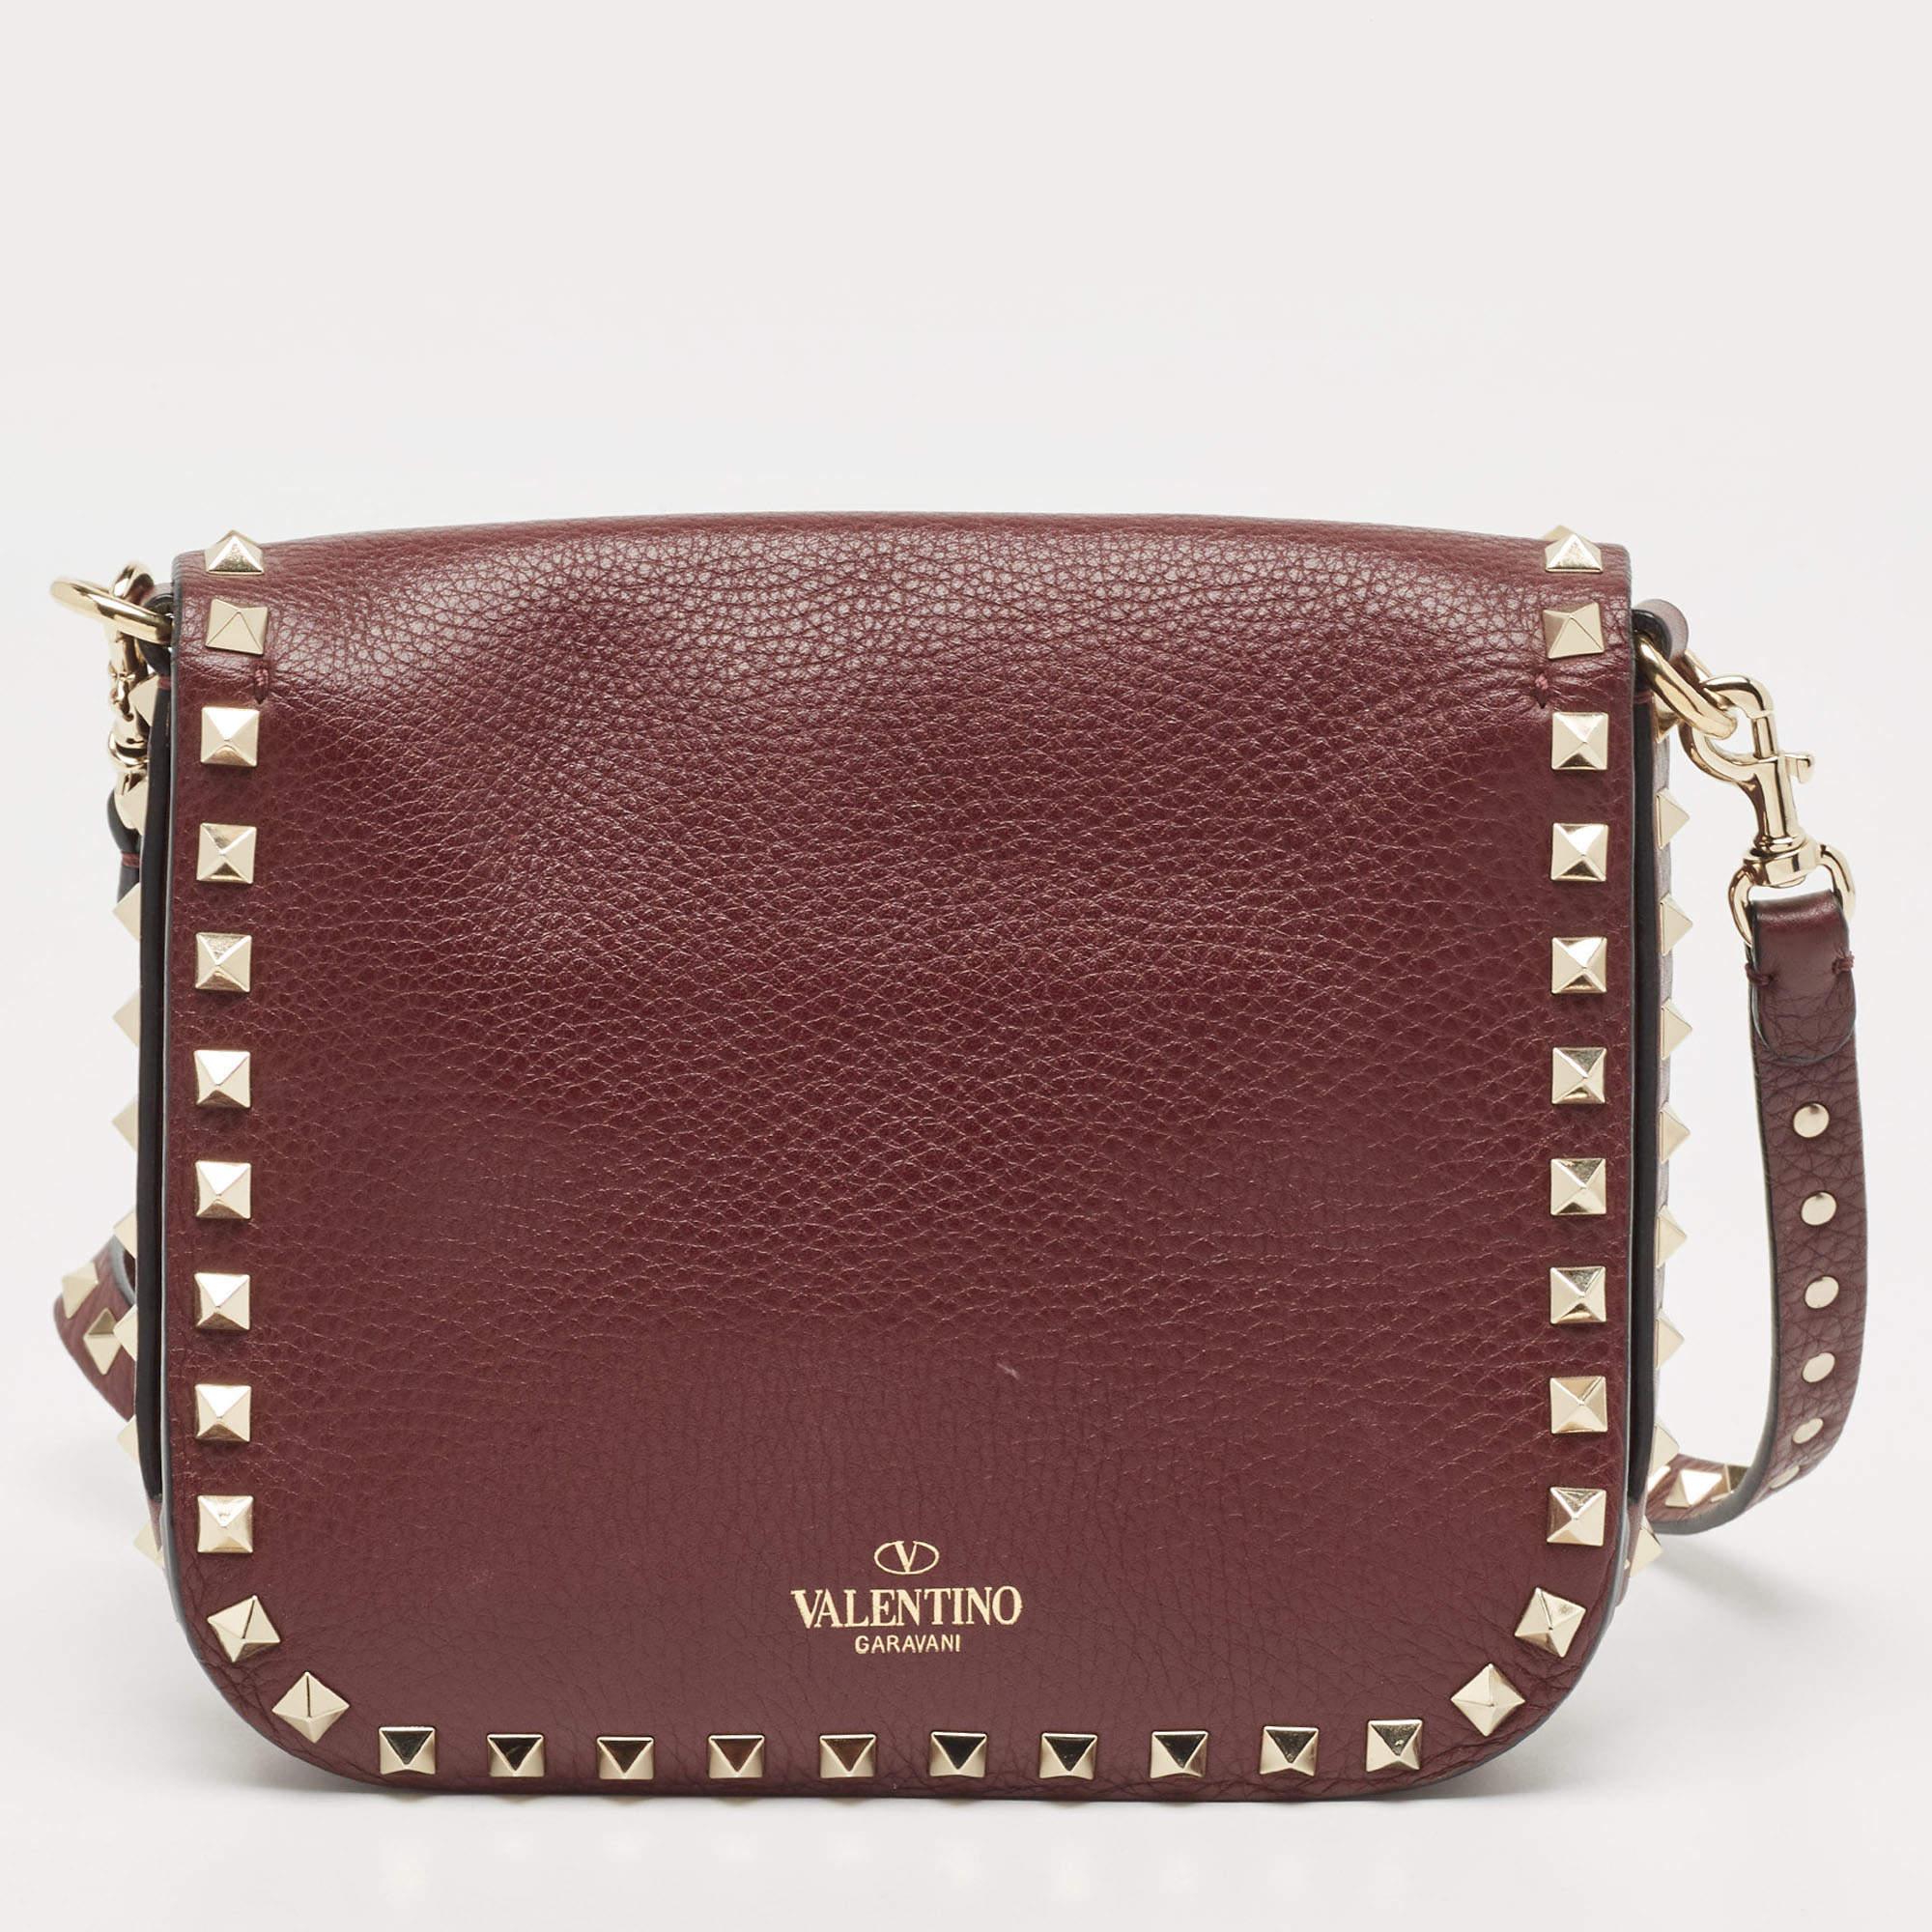 Express your personal style with this high-end crossbody bag. Crafted from quality materials, it has been added with fine details and is finished perfectly. It features a well-sized interior.

Includes: Detachable Strap